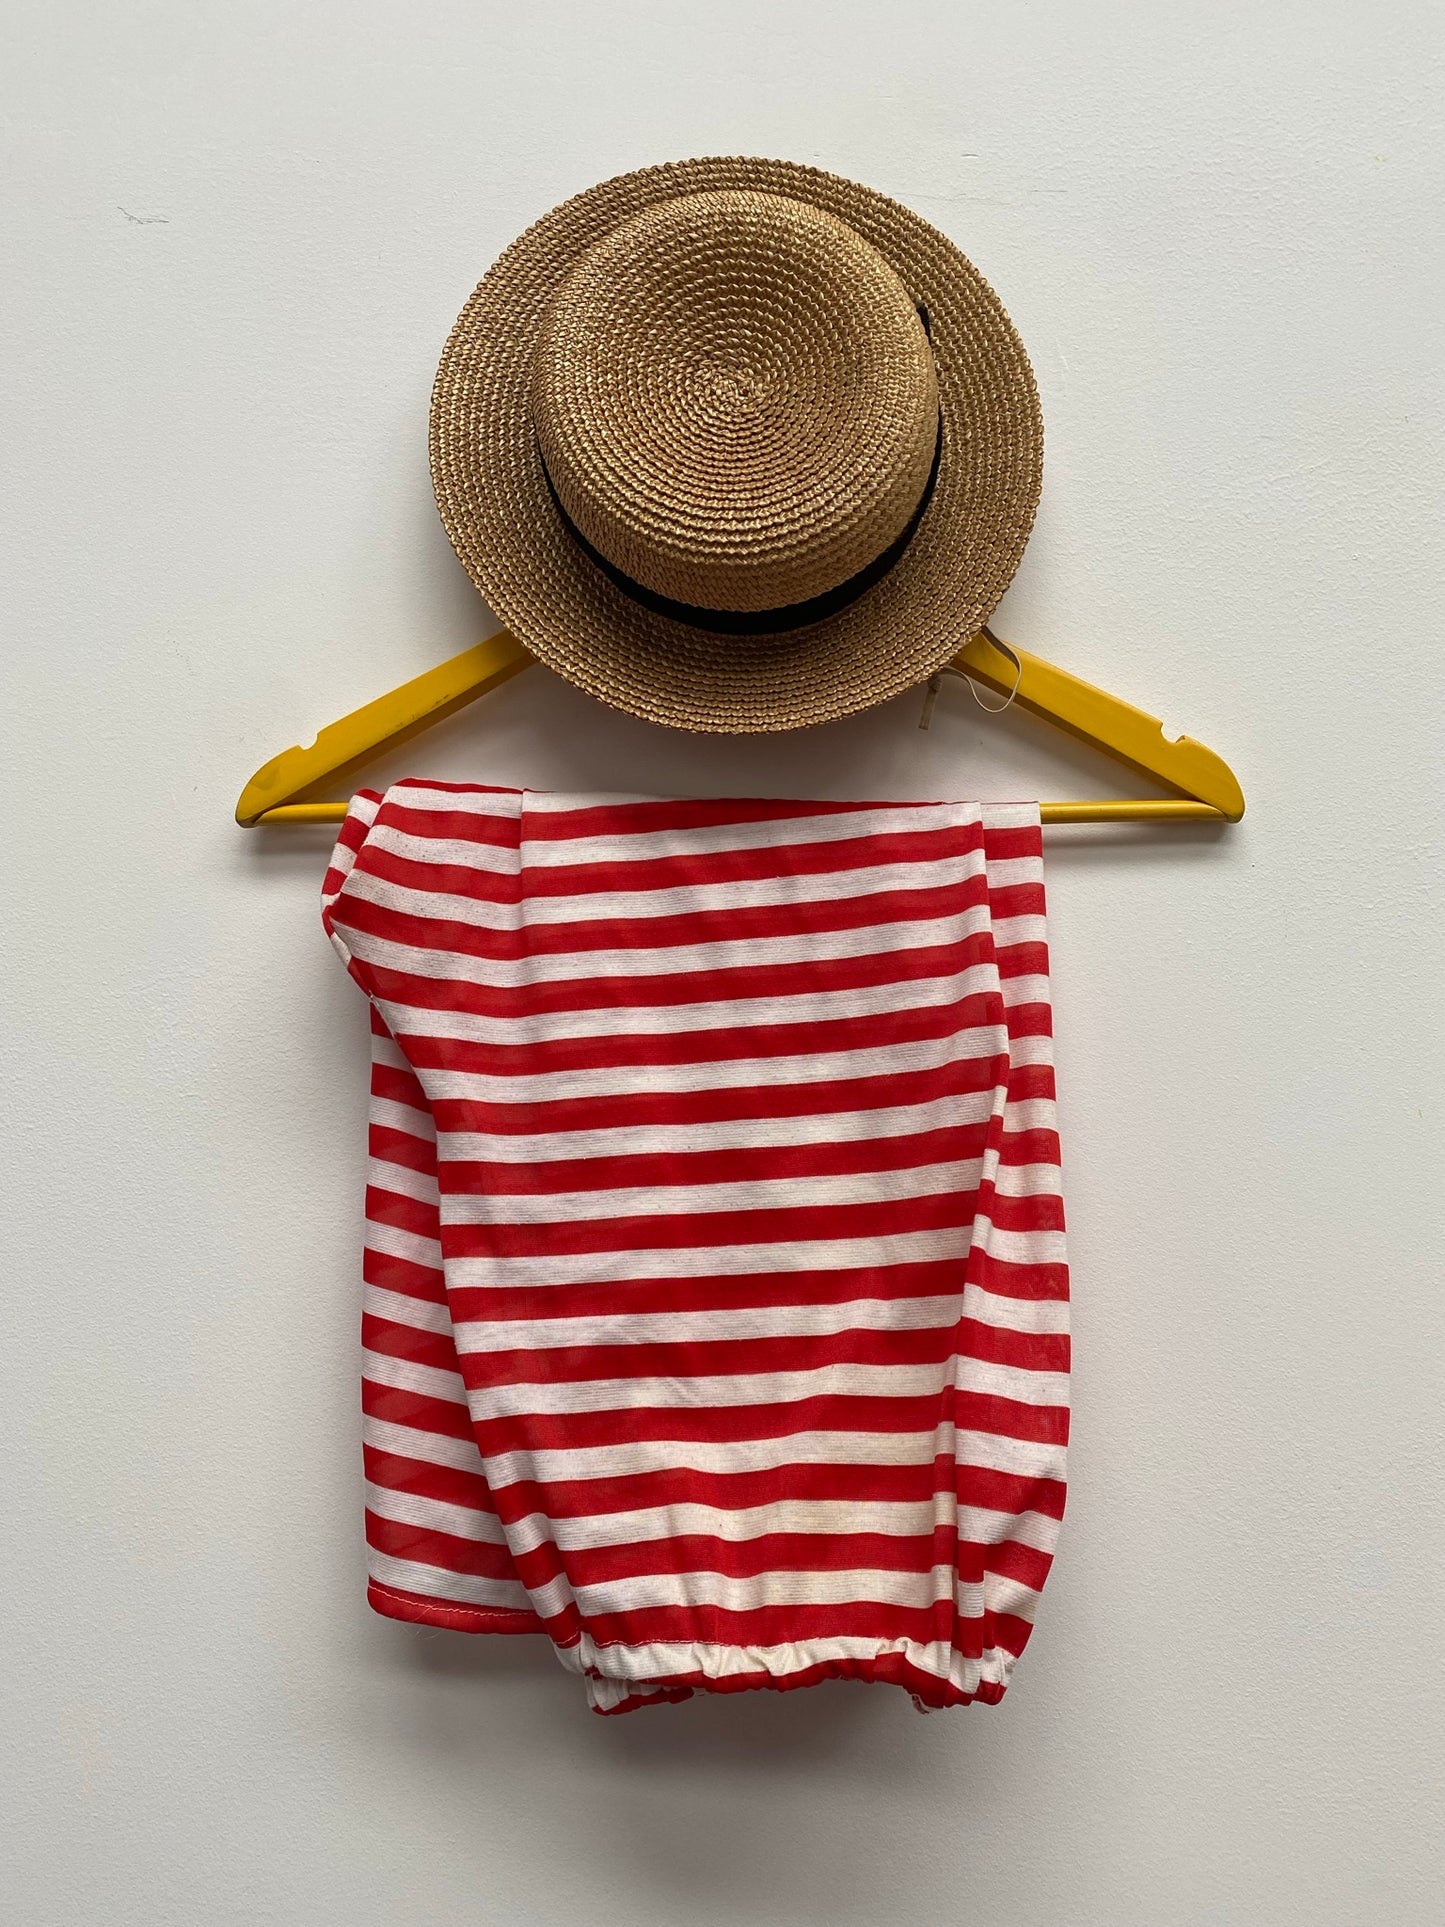 Red Old Time Striped Bathing Suit & Hat One Size - Ex Hire Fancy Dress Costume